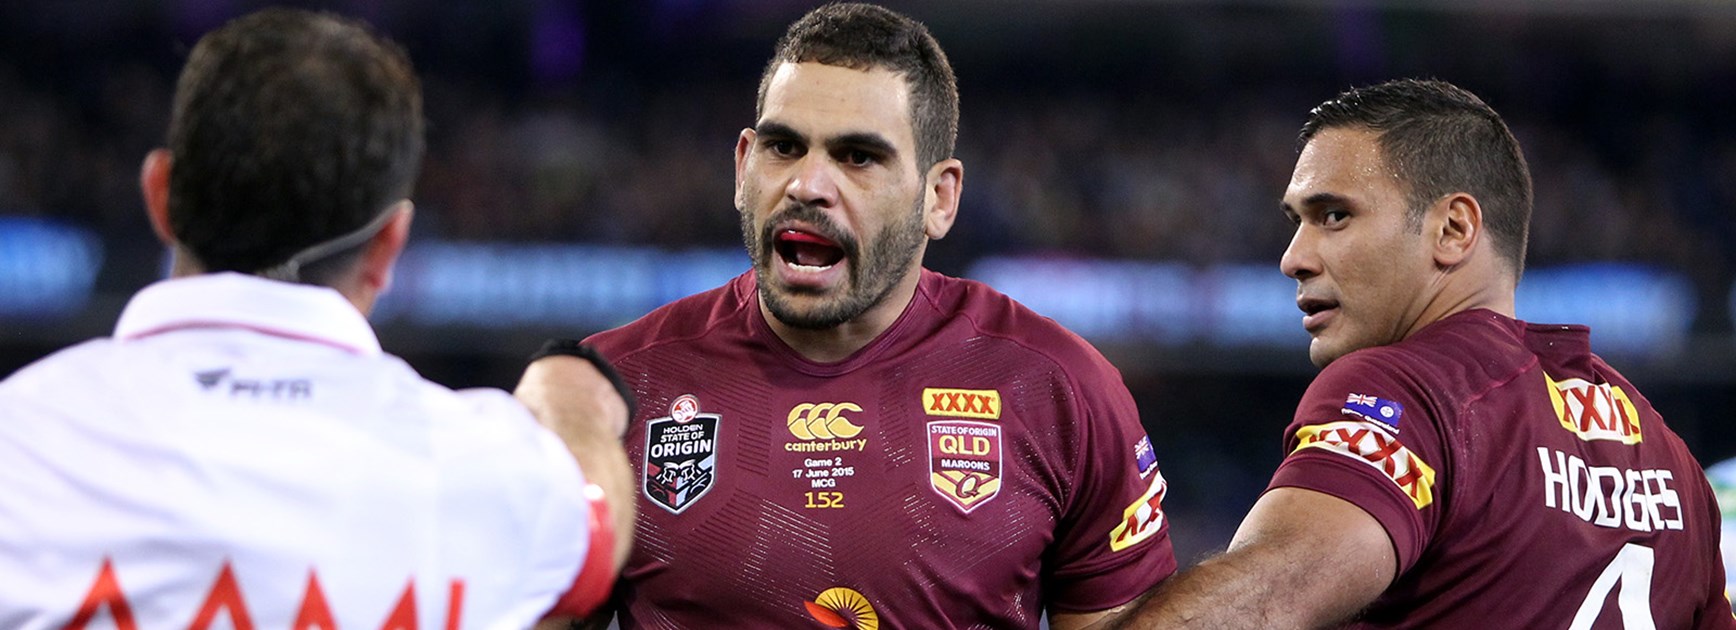 Greg Inglis argues with the referee during State of Origin II at the MCG.